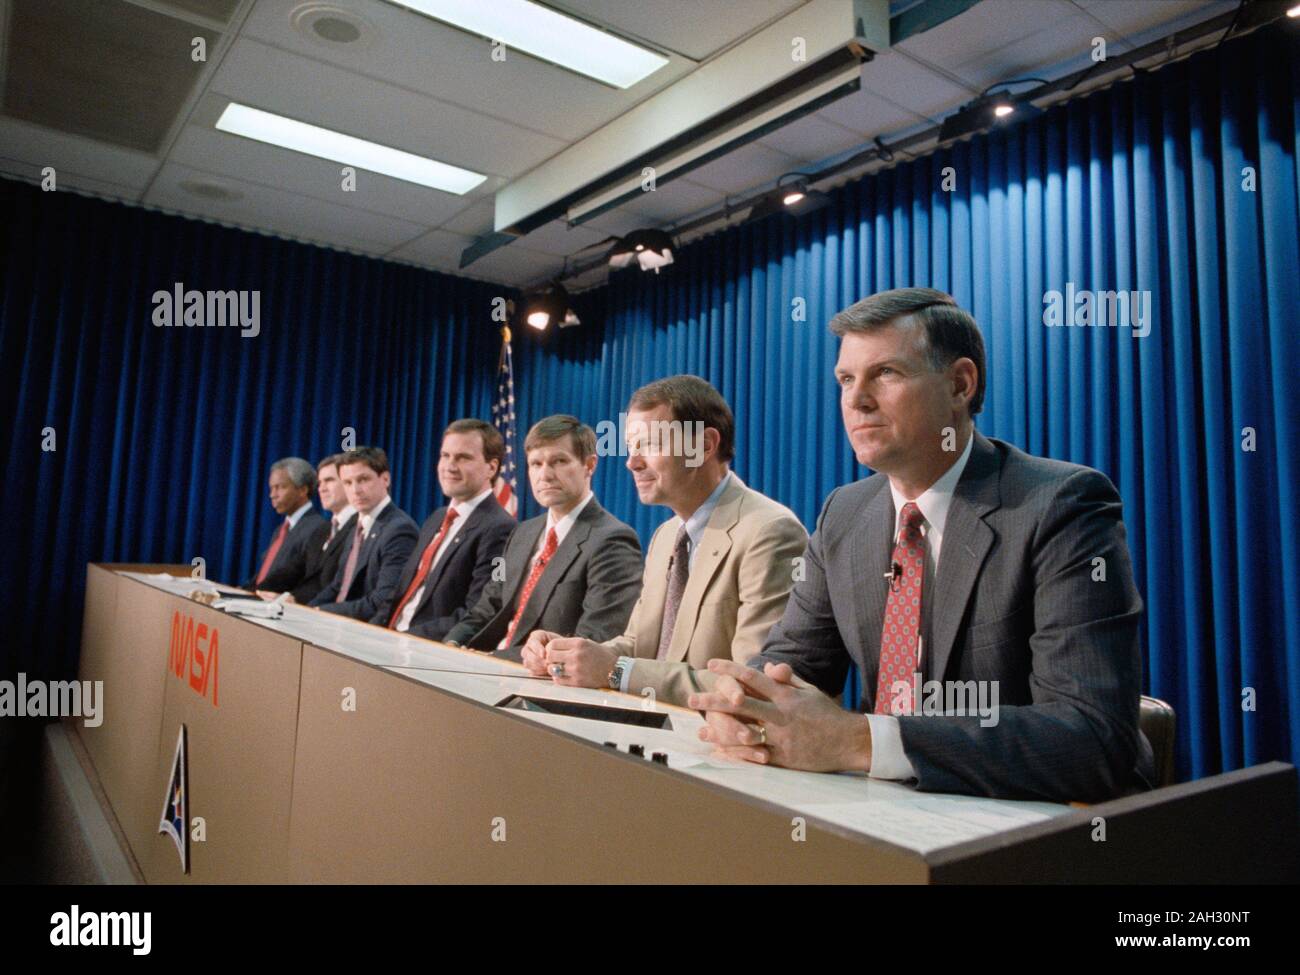 (23 Jan 1991) --- Astronaut Michael L. Coats,  mission commander, listens attentively as a news media representative (out of frame) queries the STS-39 crewmembers during a pre-flight press briefing. The others, pictured left to right, are Astronauts Guion (Guy) S. Bluford, C. Lacy Veach, Gregory J. Harbaugh, Richard J. Hieb, Donald R. McMonagle and L. Blaine Hammond Jr. Stock Photo